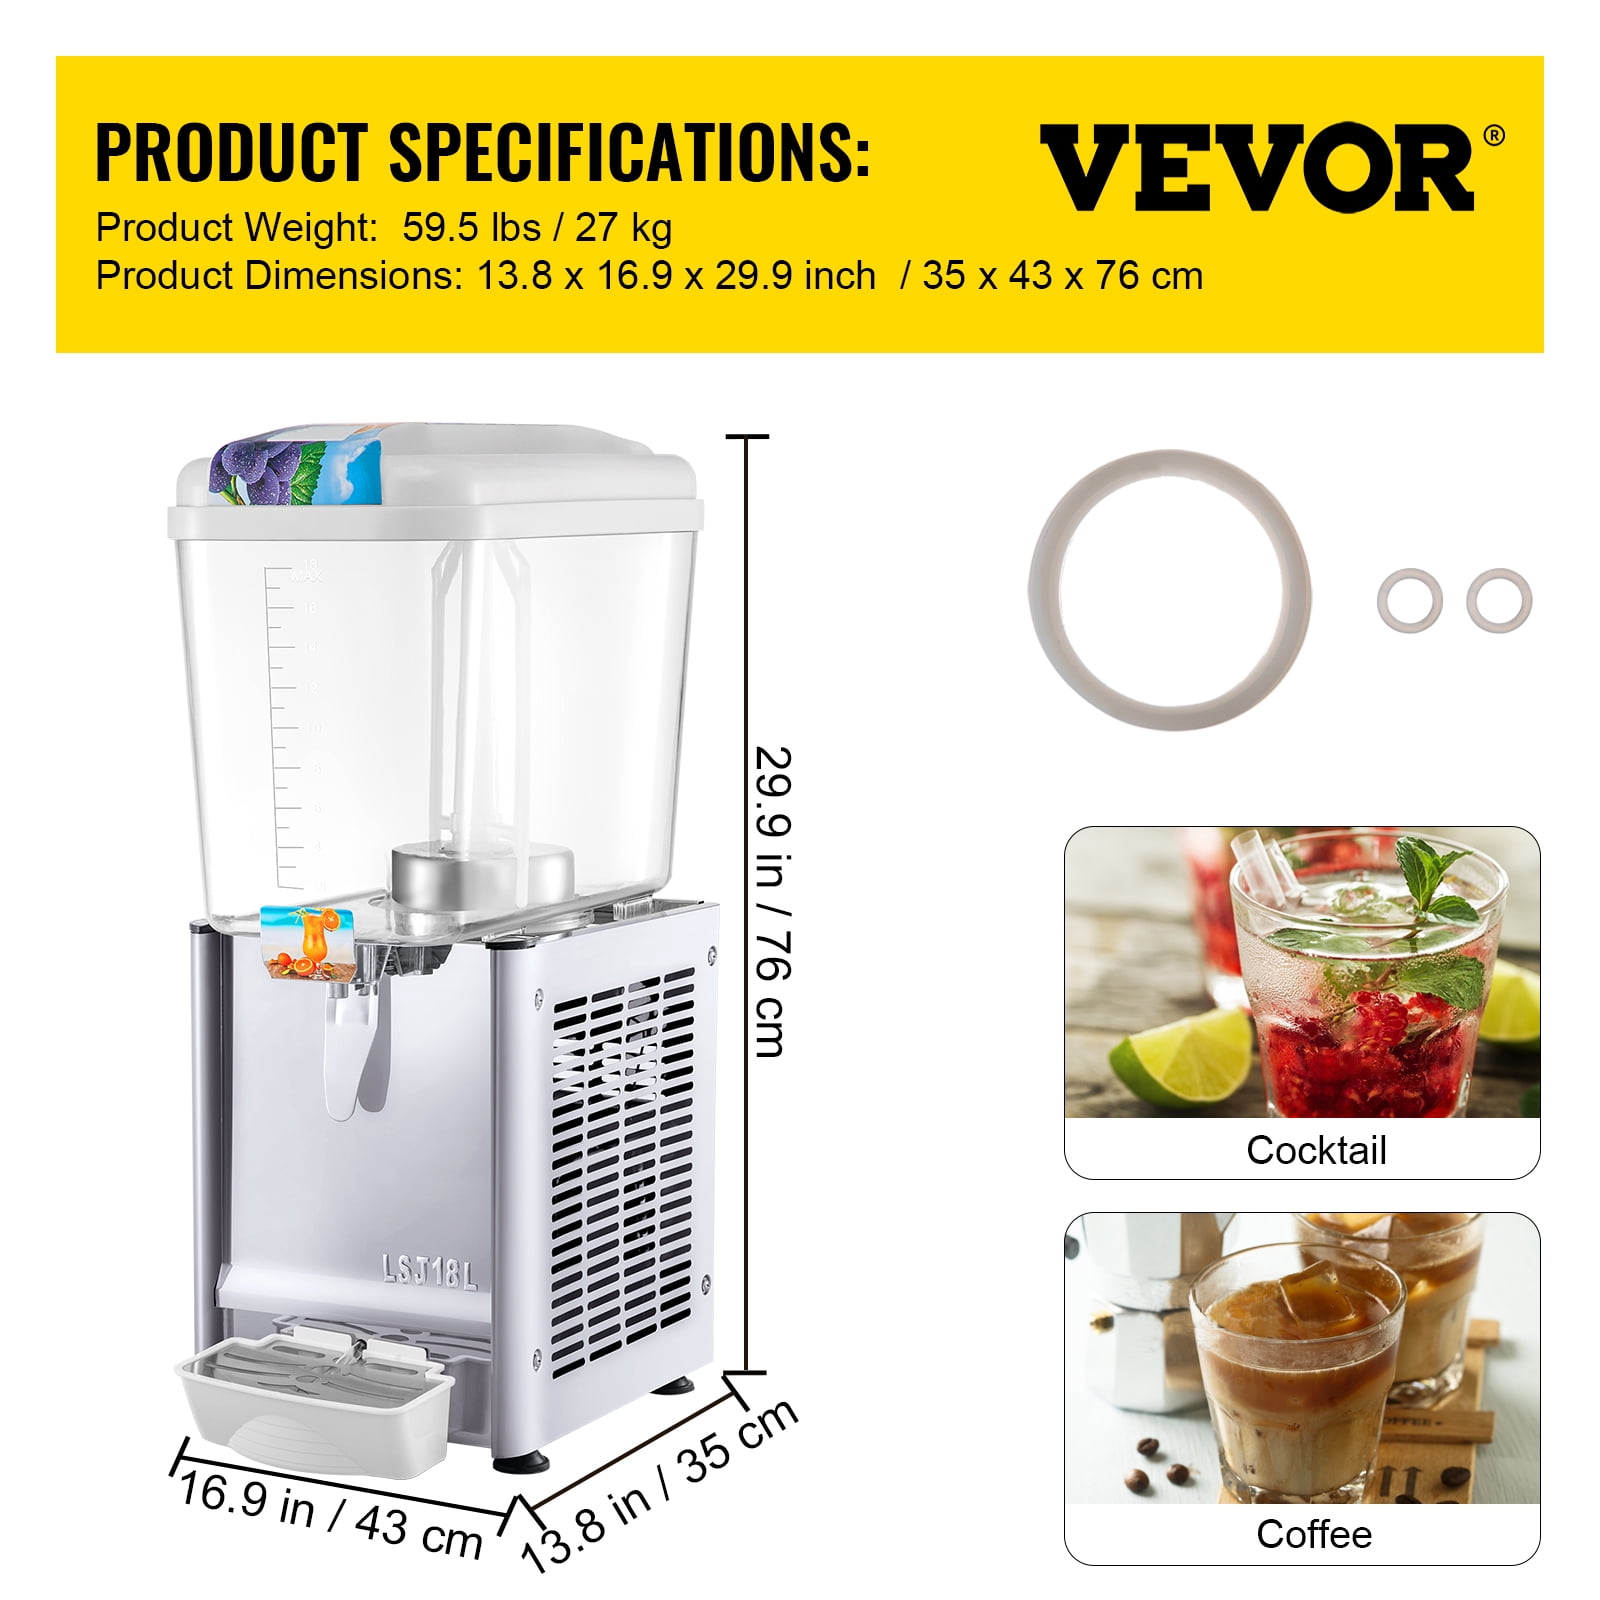 VEVOR 110V Commercial Beverage Dispenser,9.5 Gallon 36L 2 Tanks Juice Dispenser  Commercial,18 Liter Per Tank 300W Stainless Steel Food Grade Material Ice  Tea Drink Dispenser Equipped with Thermostat Controller